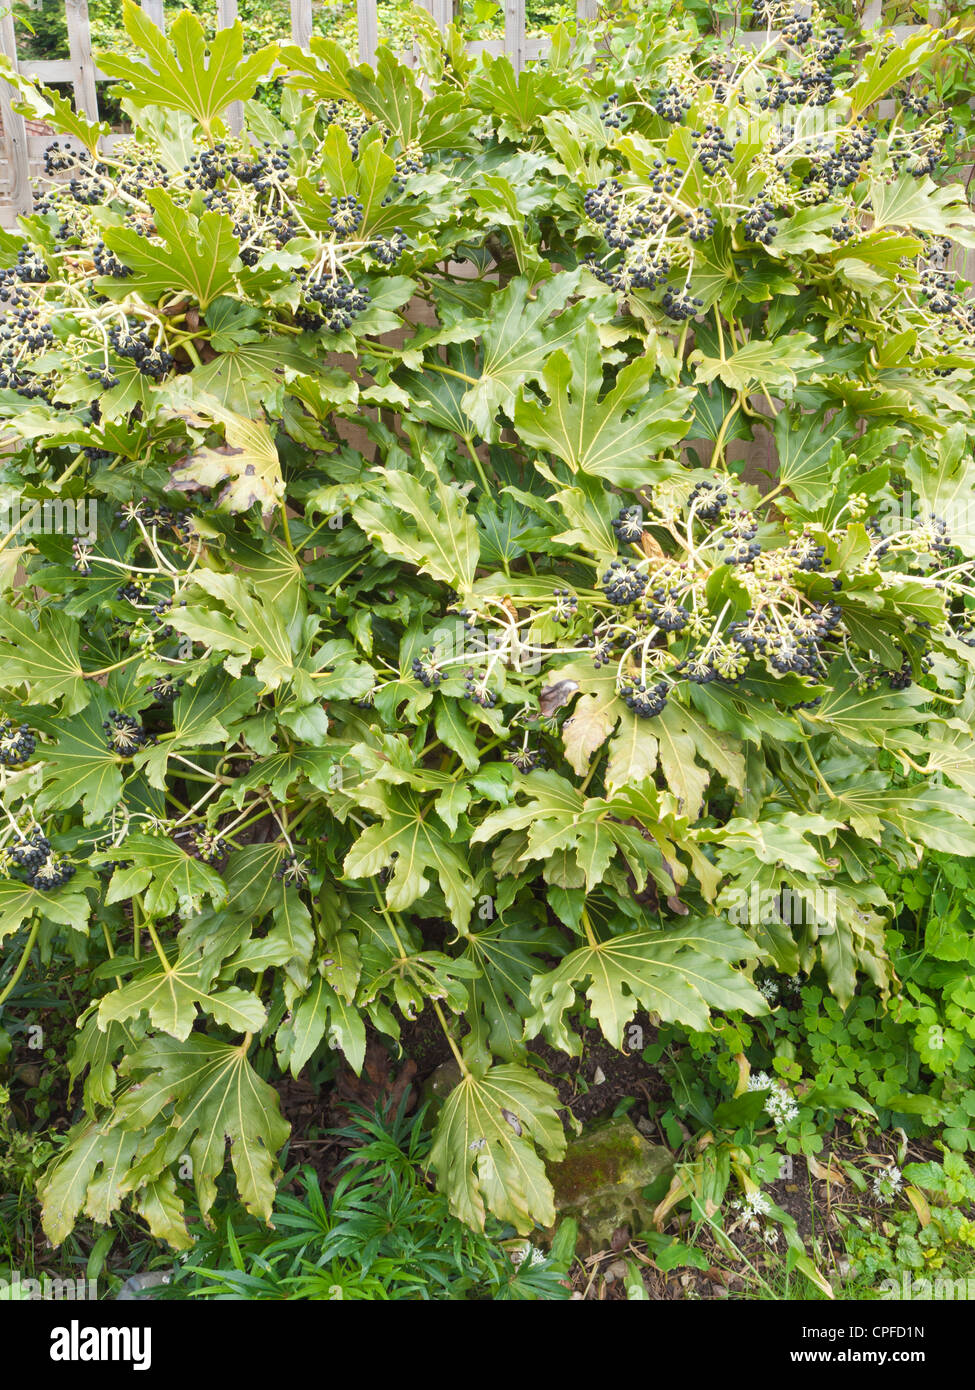 Fatsia japonica (Fatsi) or Japanese Aralia japonica grown as a decorative garden shrub in England with fruit berries in spring Stock Photo